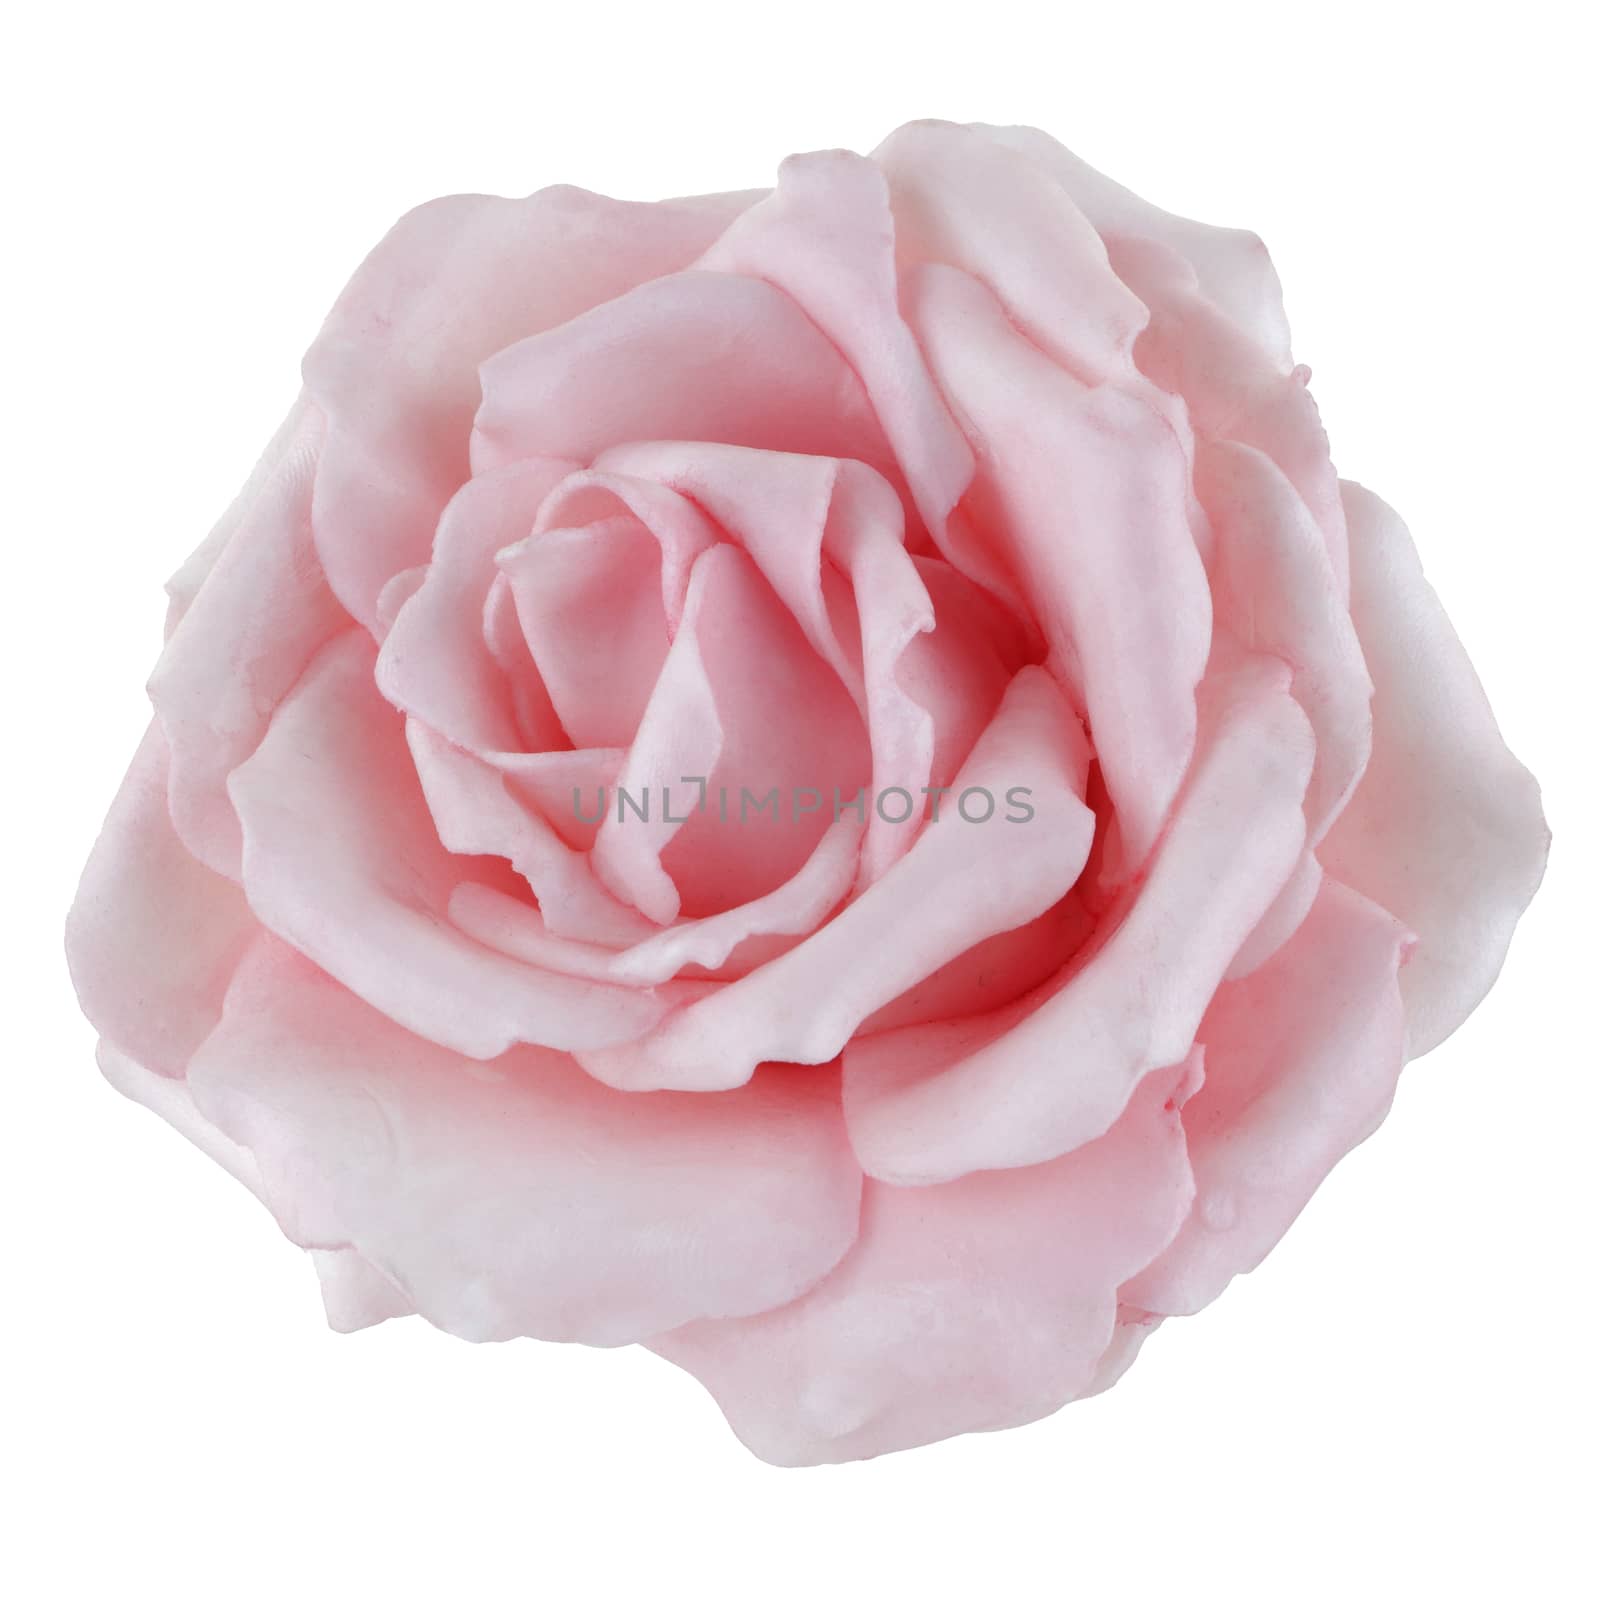 Single pink paper rose on white with clipping path by VivacityImages